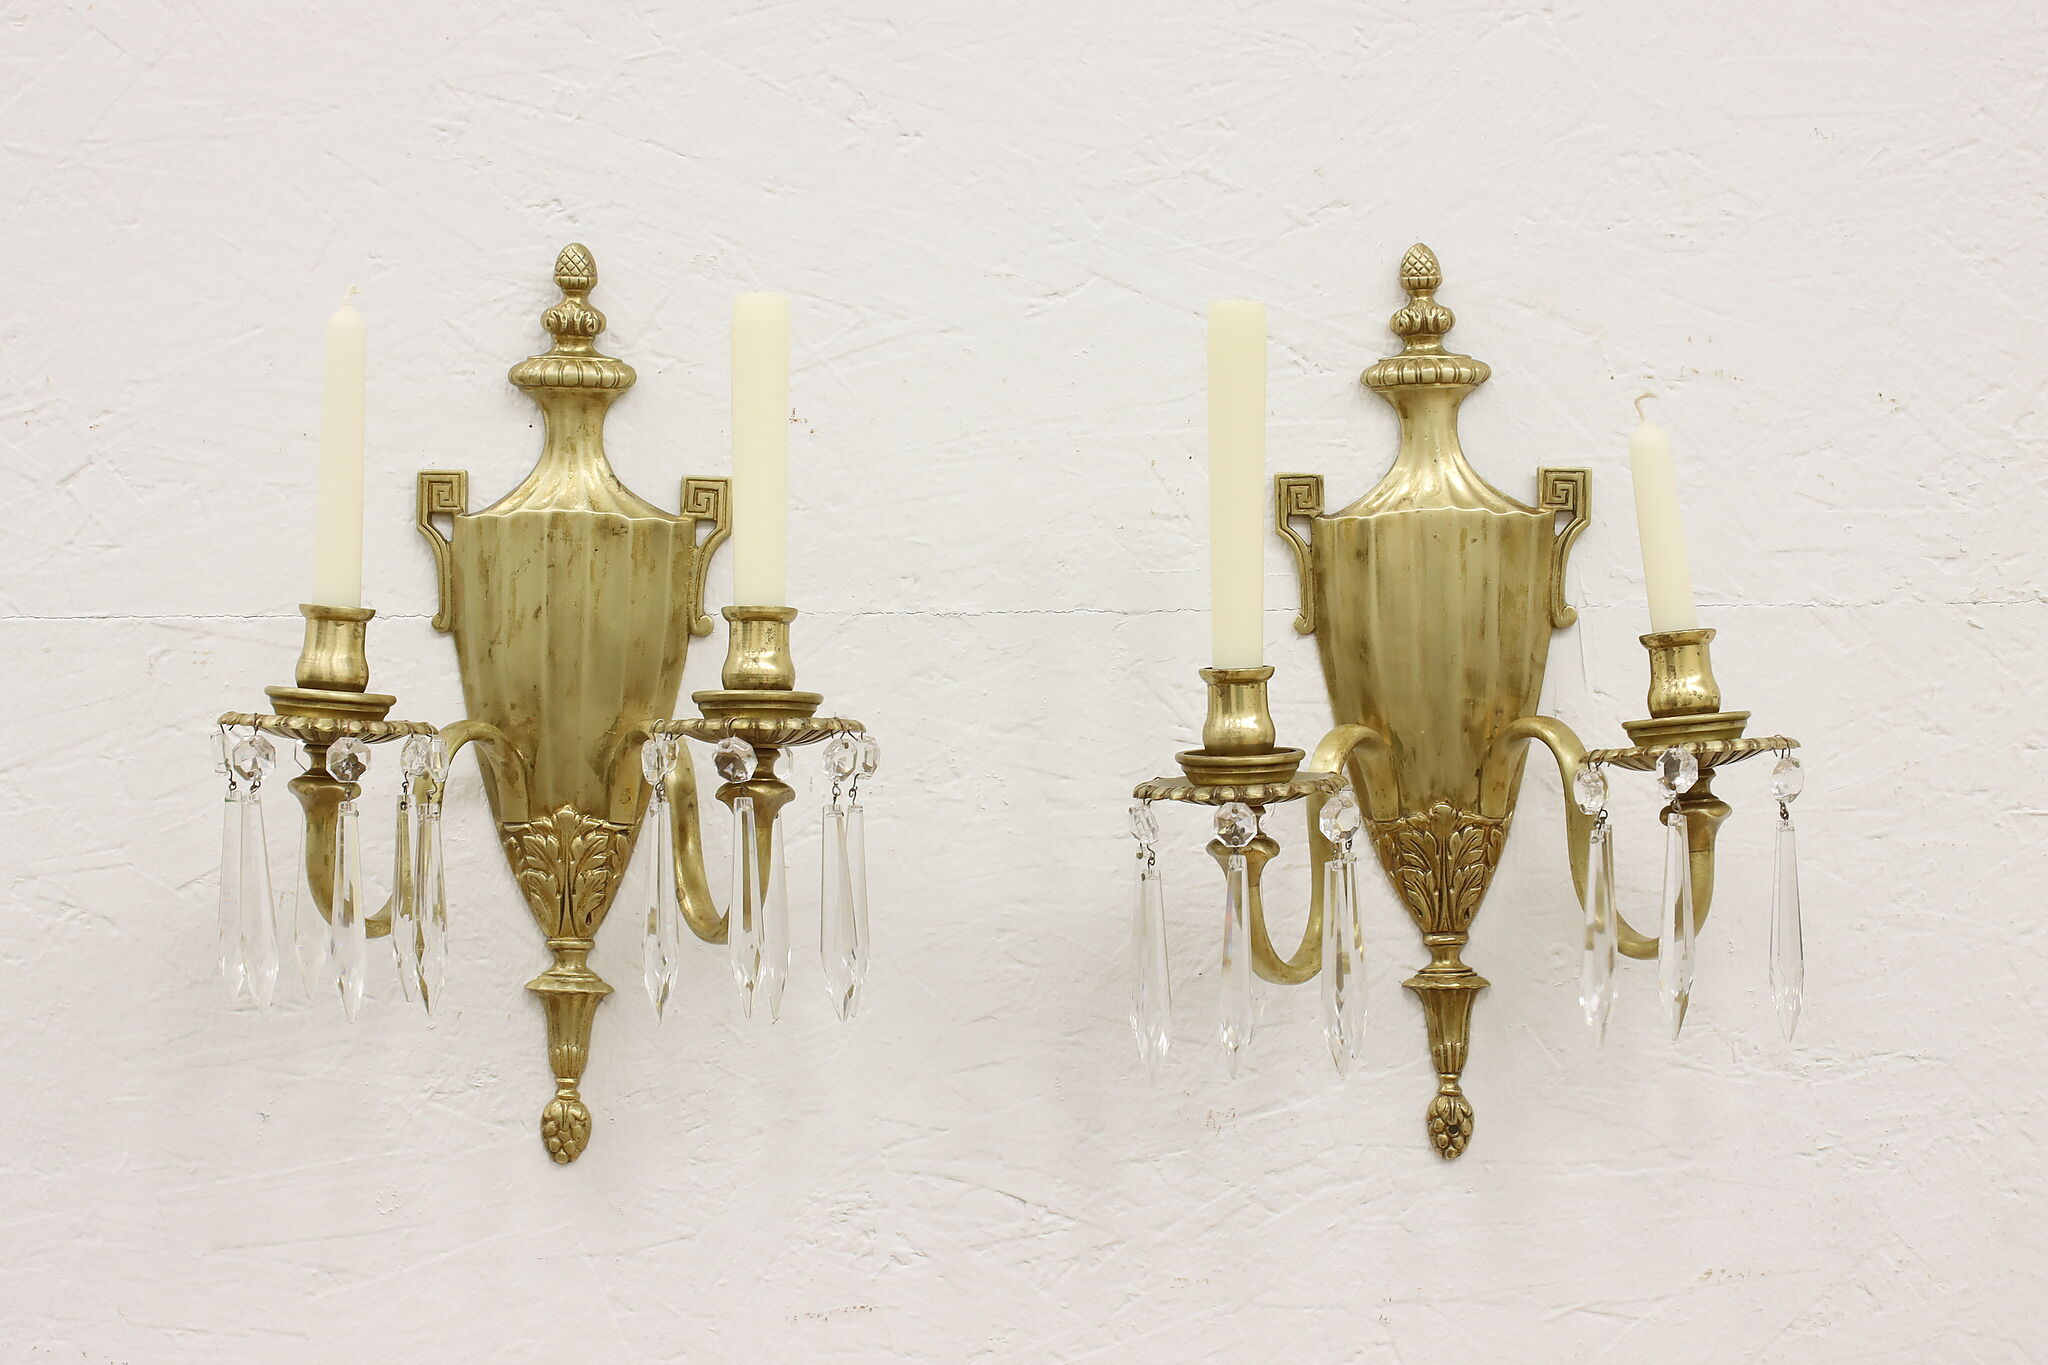 Pair of Classical Vintage Brass & Prisms Wall Candle Sconces